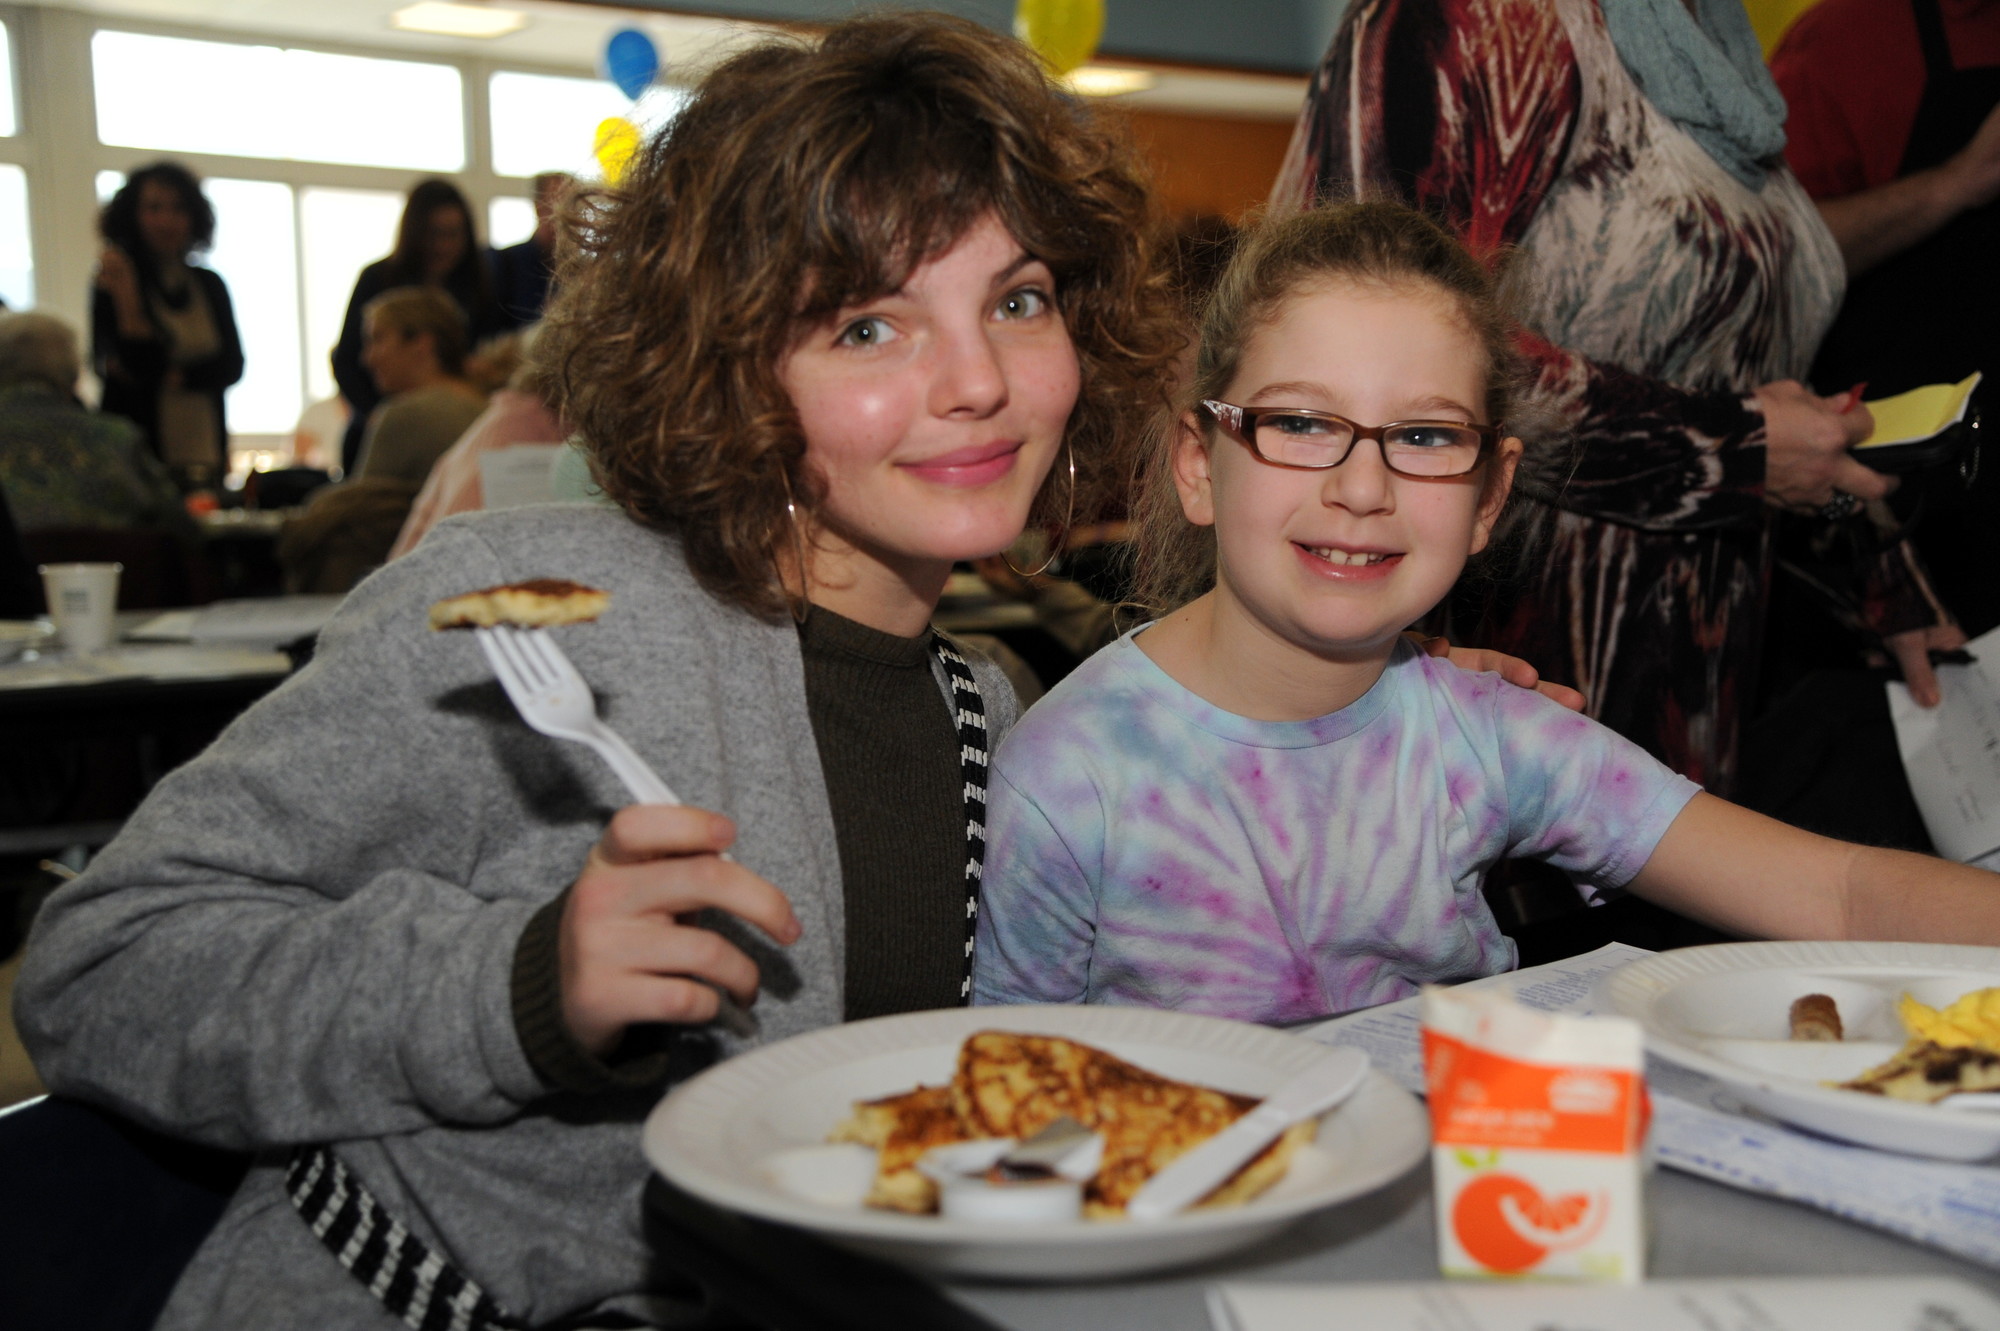 Camren Bicondova, 15, who plays the young Selina Kyle, or Catwoman, on the Fox television show “Gotham,” met 9-year-old Sydney Follick and many other local residents at the East Meadow Kiwanis Club’s pancake breakfast at East Meadow High School on Sunday.